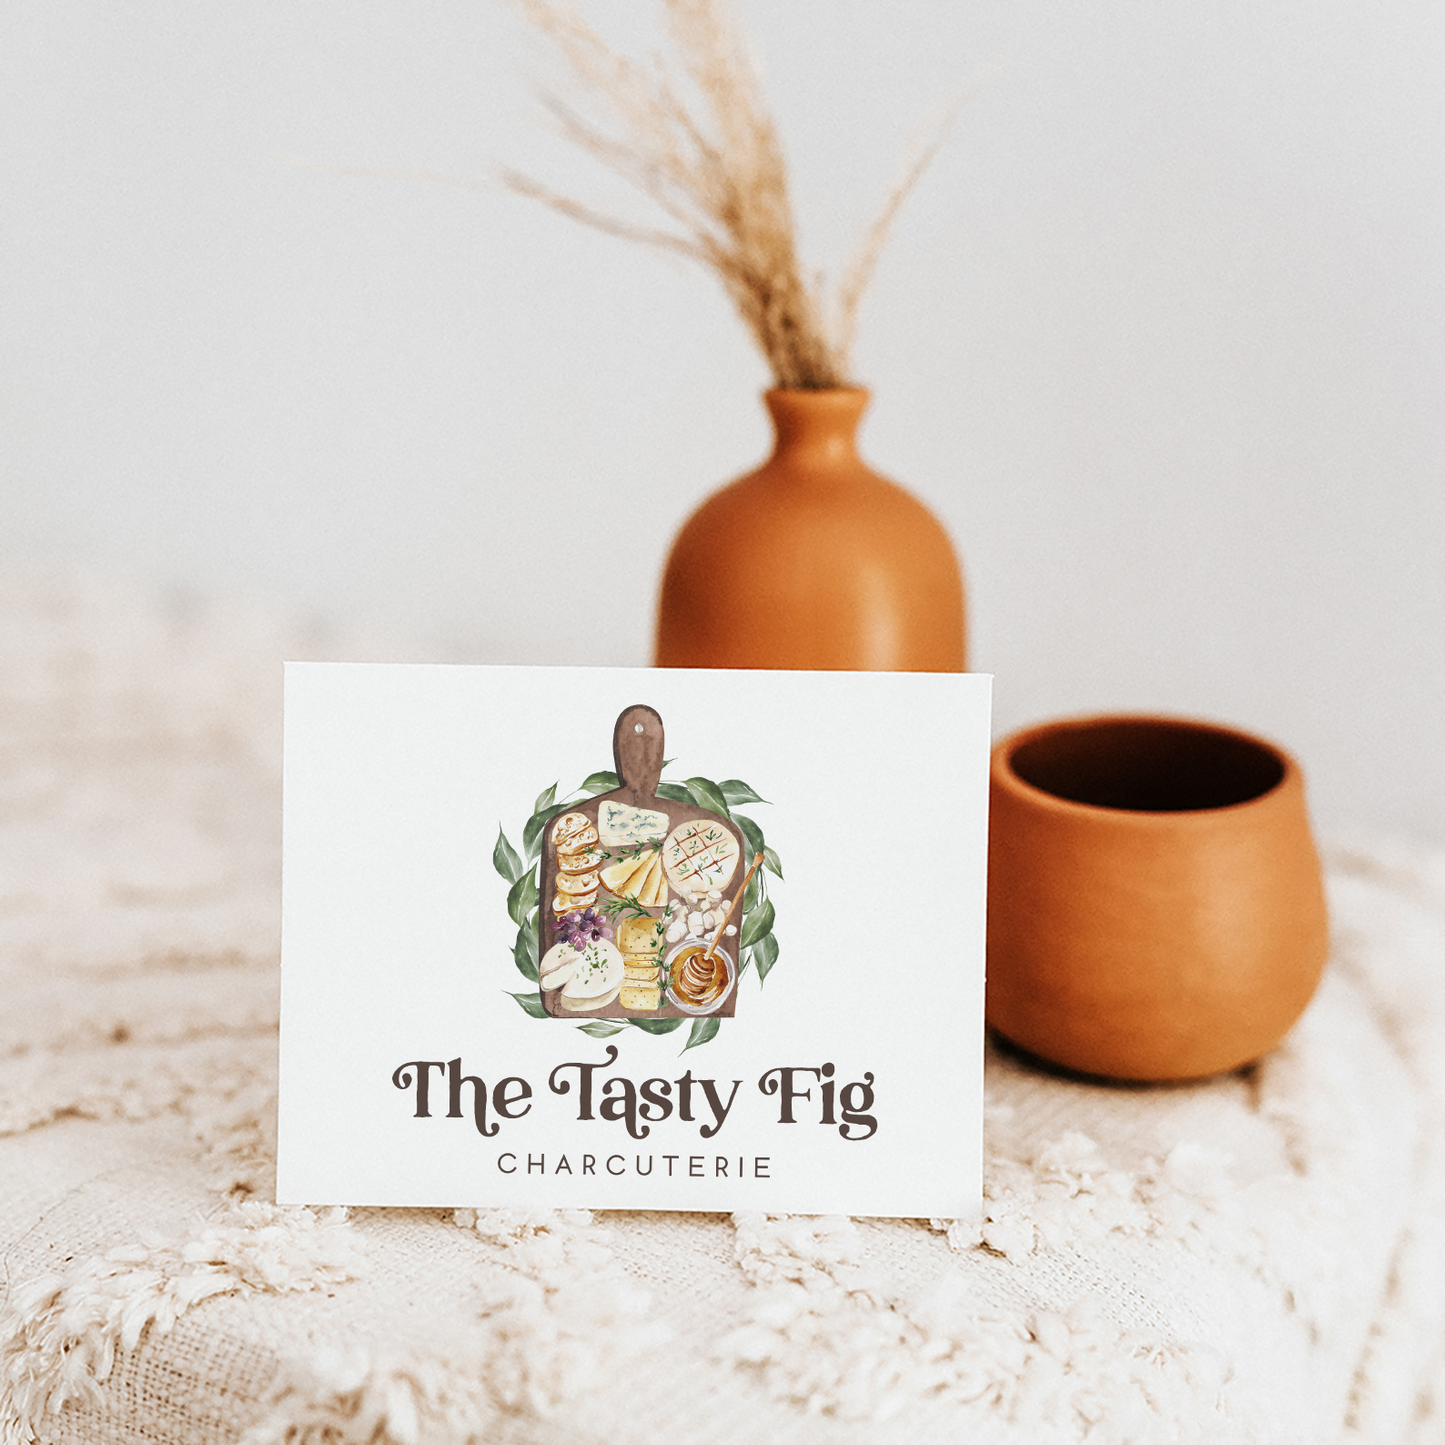 The Tasty Fig | Premade Logo Design | Charcuterie Board, Grapes, Brie Cheese, Honey, Food